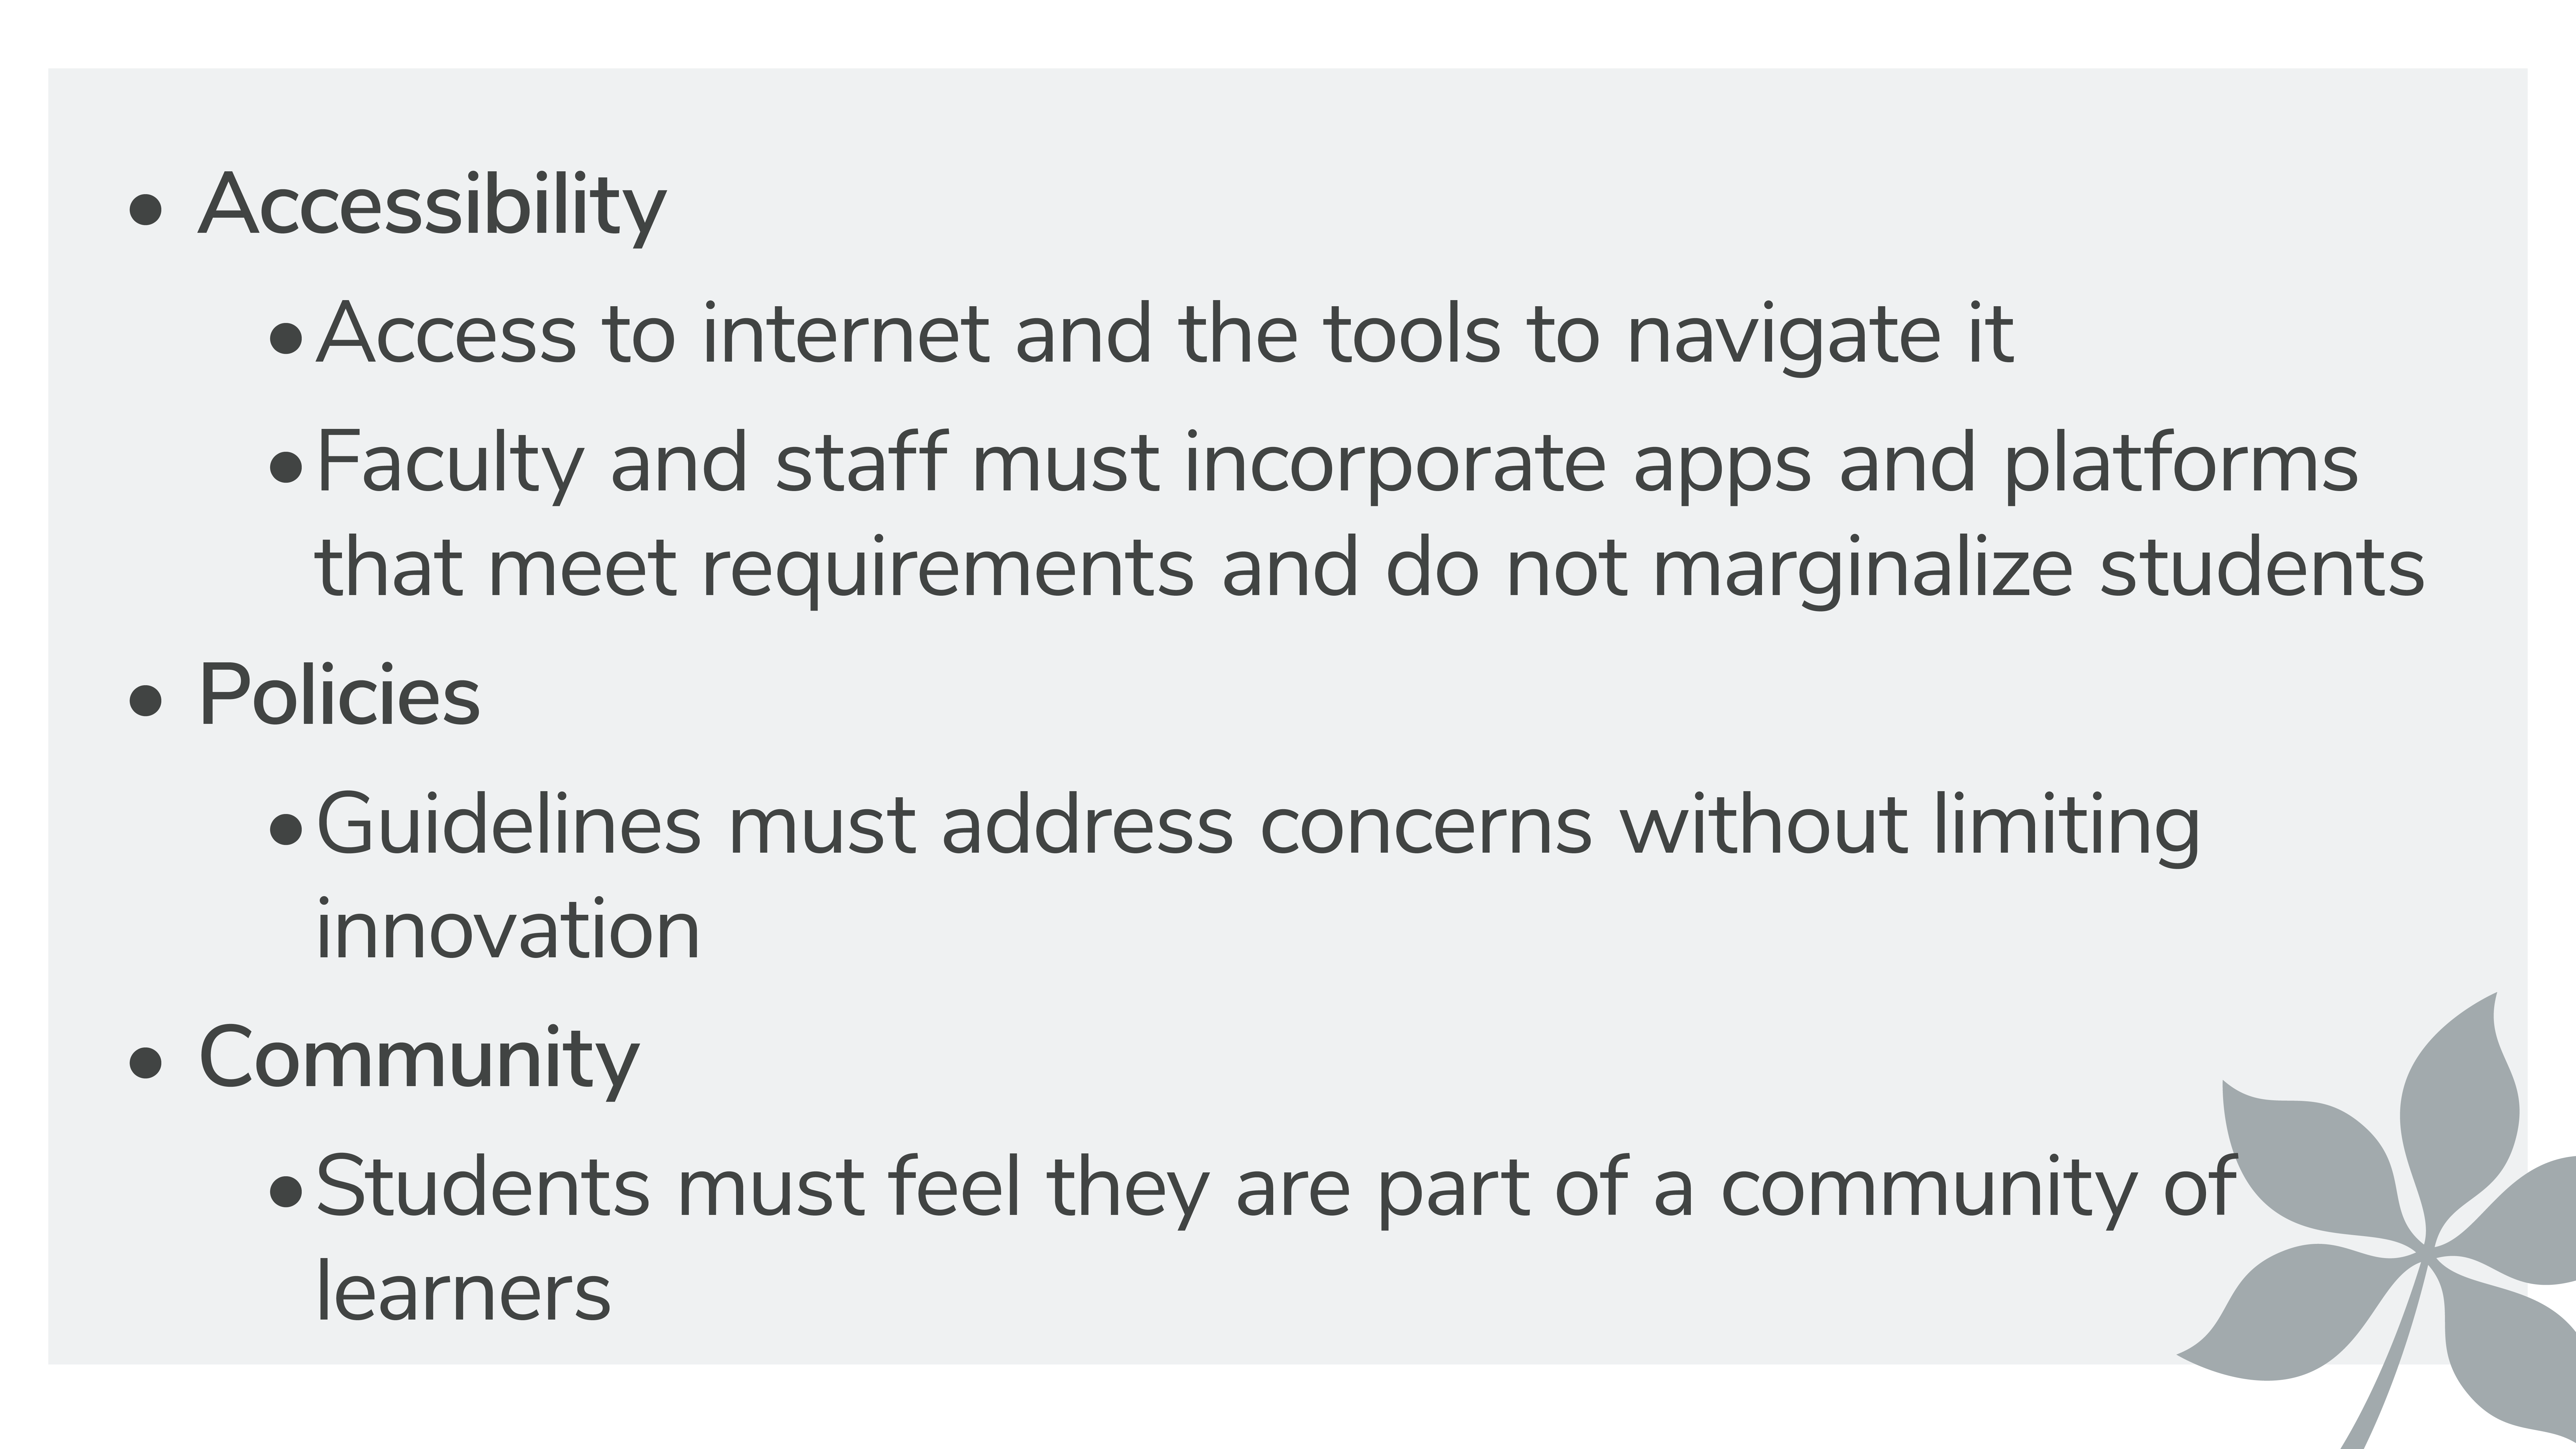 Accessibility Access to internet and the tools to navigate it Faculty and staff must incorporate apps and platforms that meet requirements and do not marginalize students Policies Guidelines must address concerns without limiting innovation Community Students must feel they are part of a community of learners